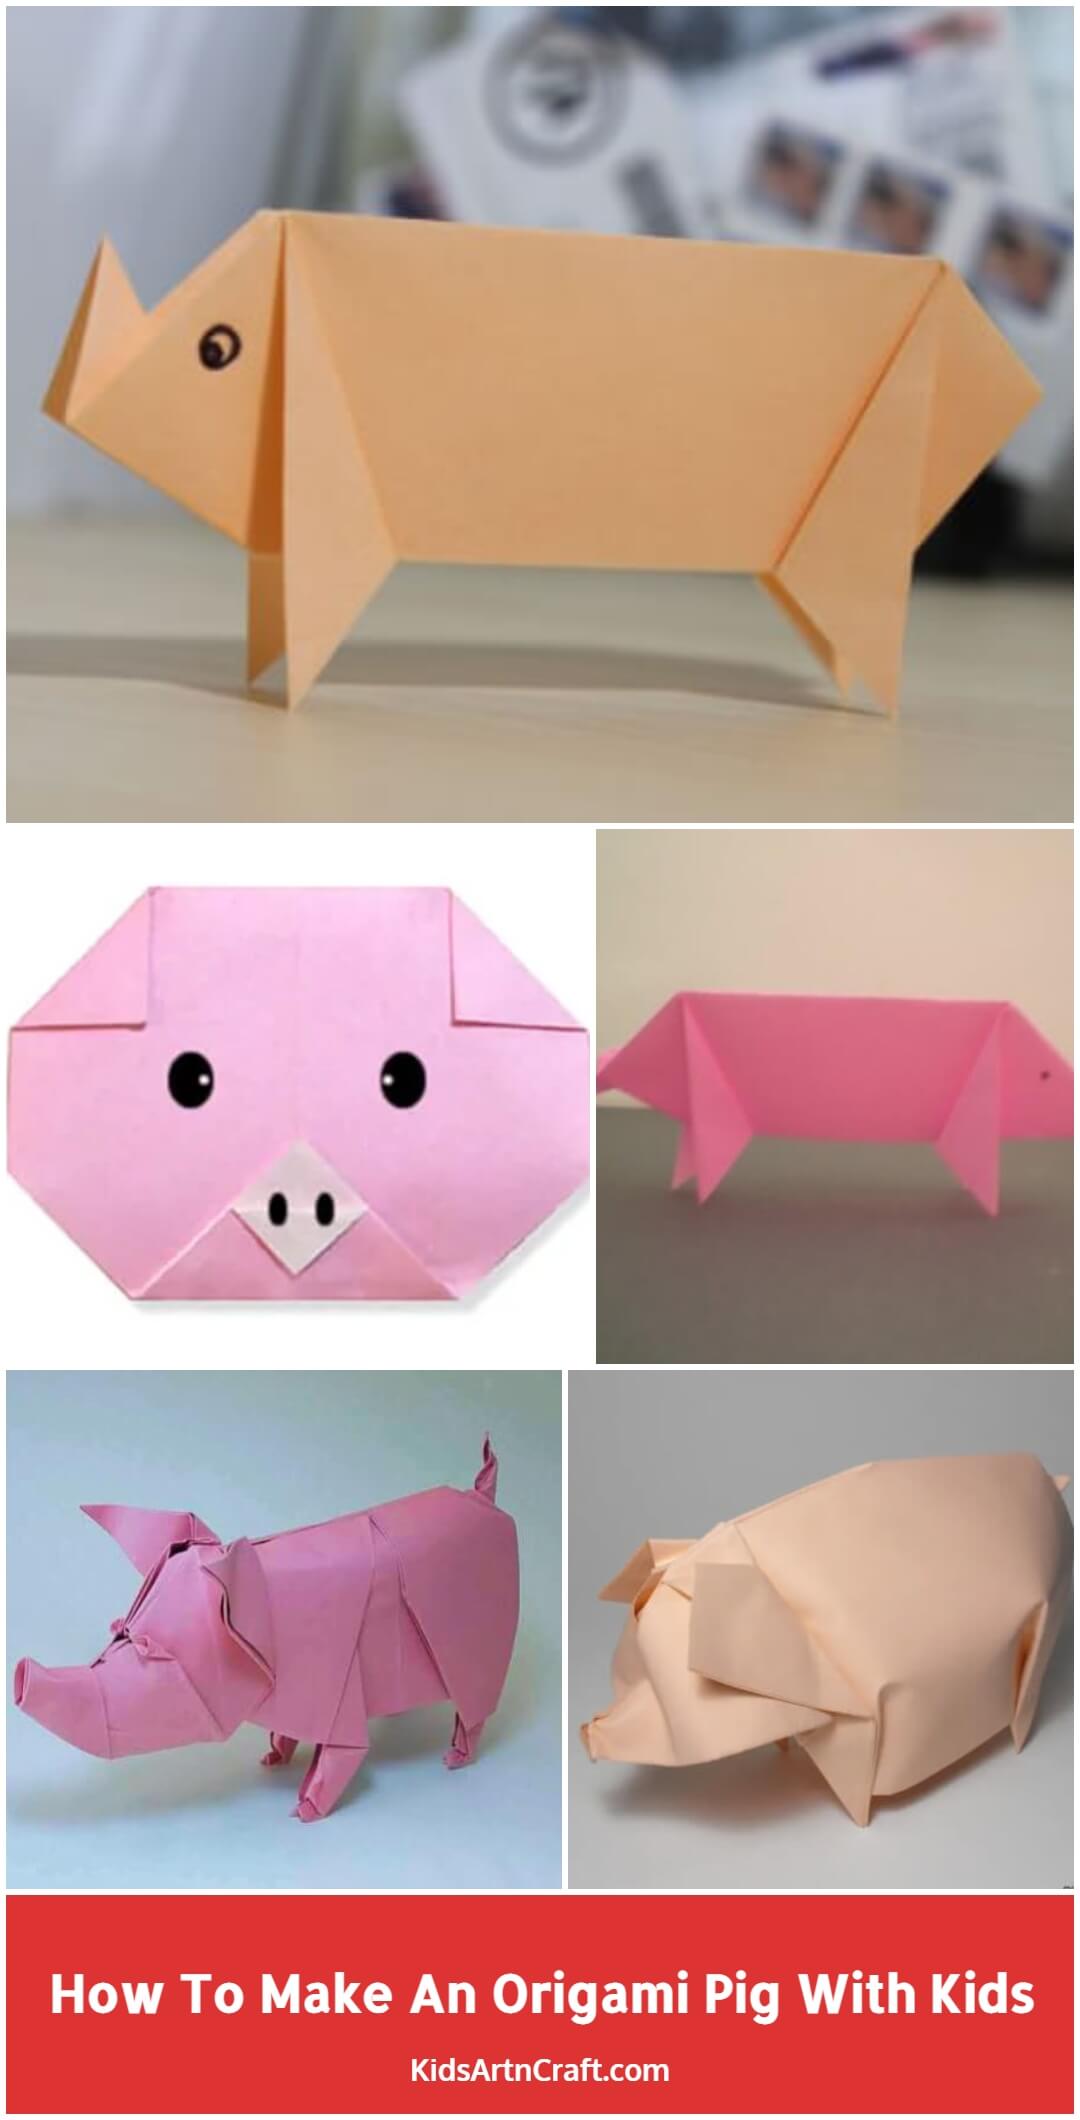 How To Make An Origami Pig With Kids